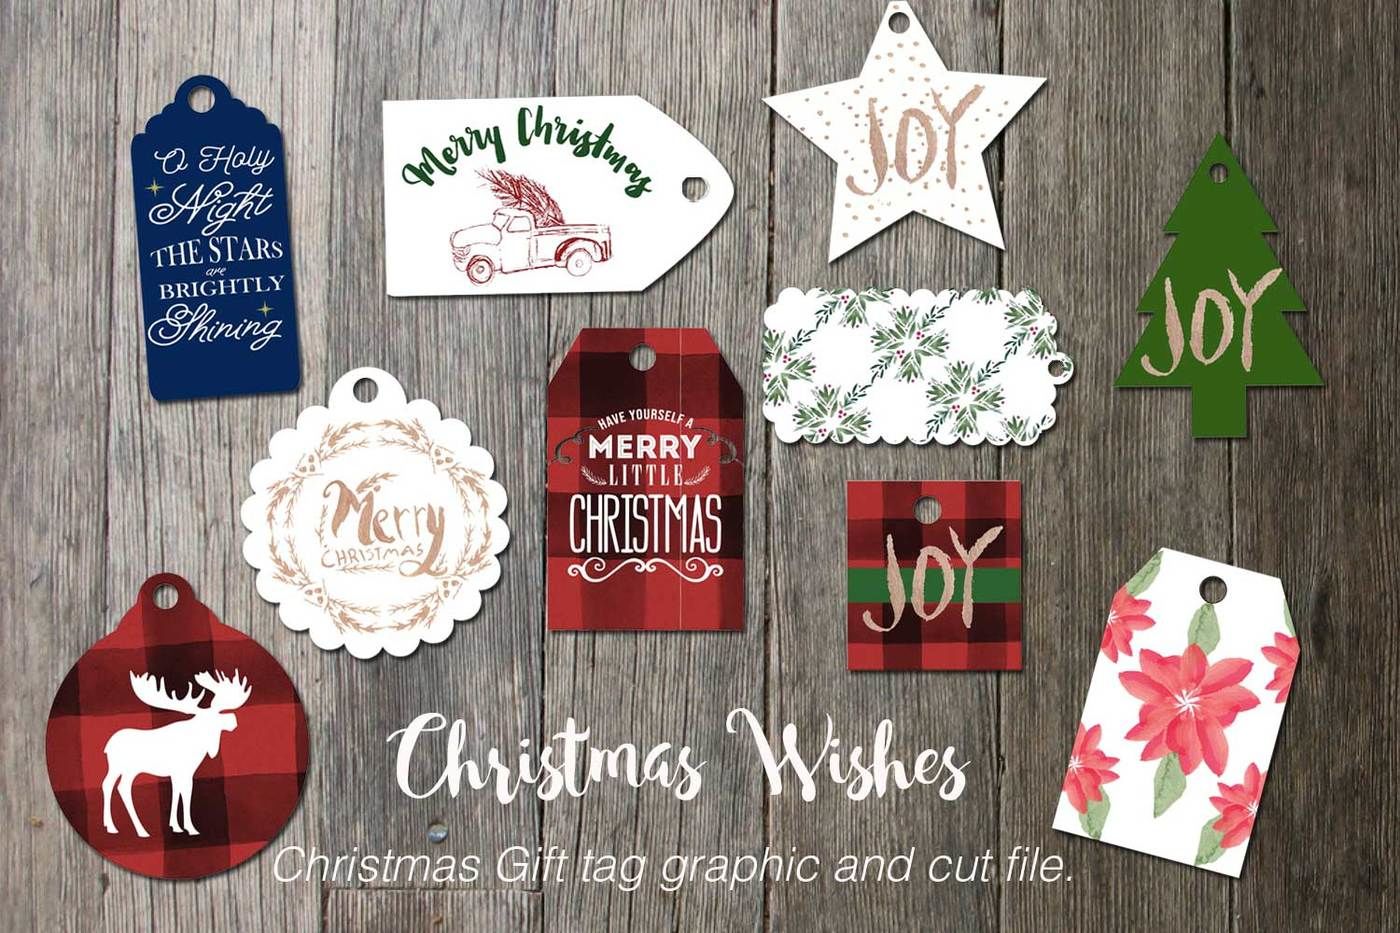 Christmas Wishes Gift Tag Graphics And Cut File By Zoss Design Thehungryjpeg Com